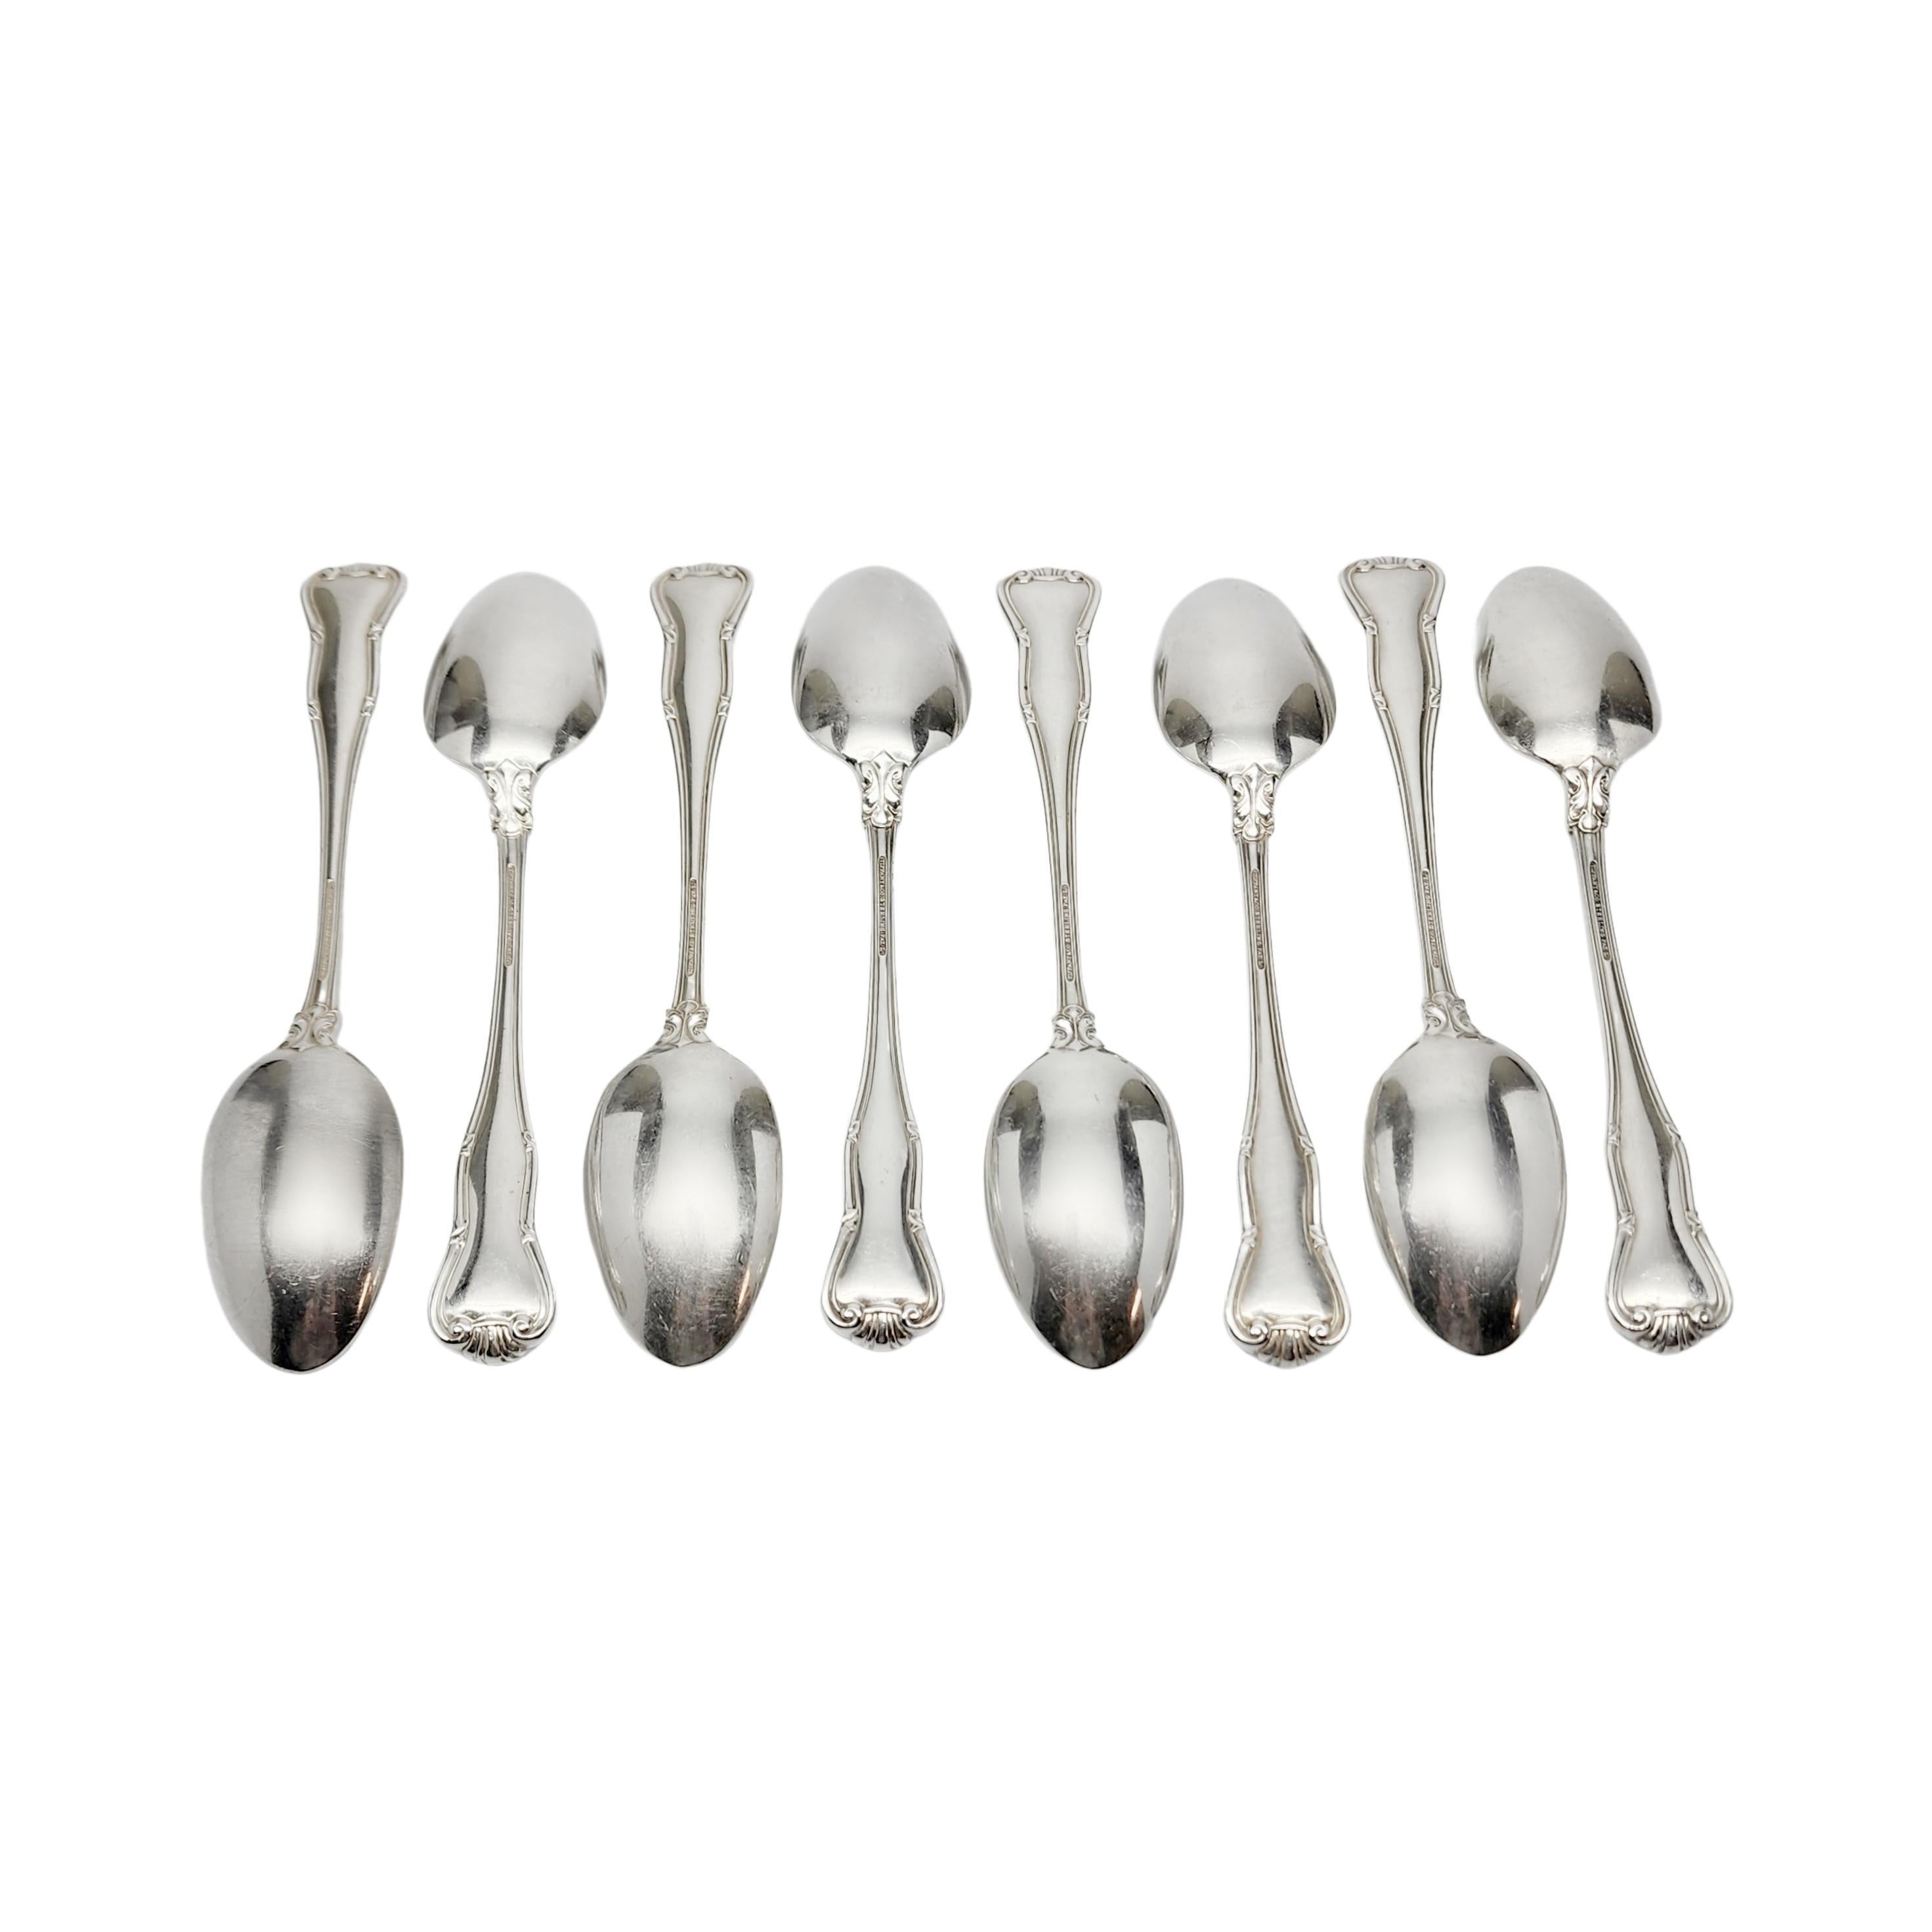 Set of 8 sterling silver teaspoons by Tiffany & Co in the Provence pattern with monogram.

Monogram appears to be U

Introduced in 1961, the Provence pattern features a crested arch, inspired by 18th Century French motifs. Hallmarks date this piece